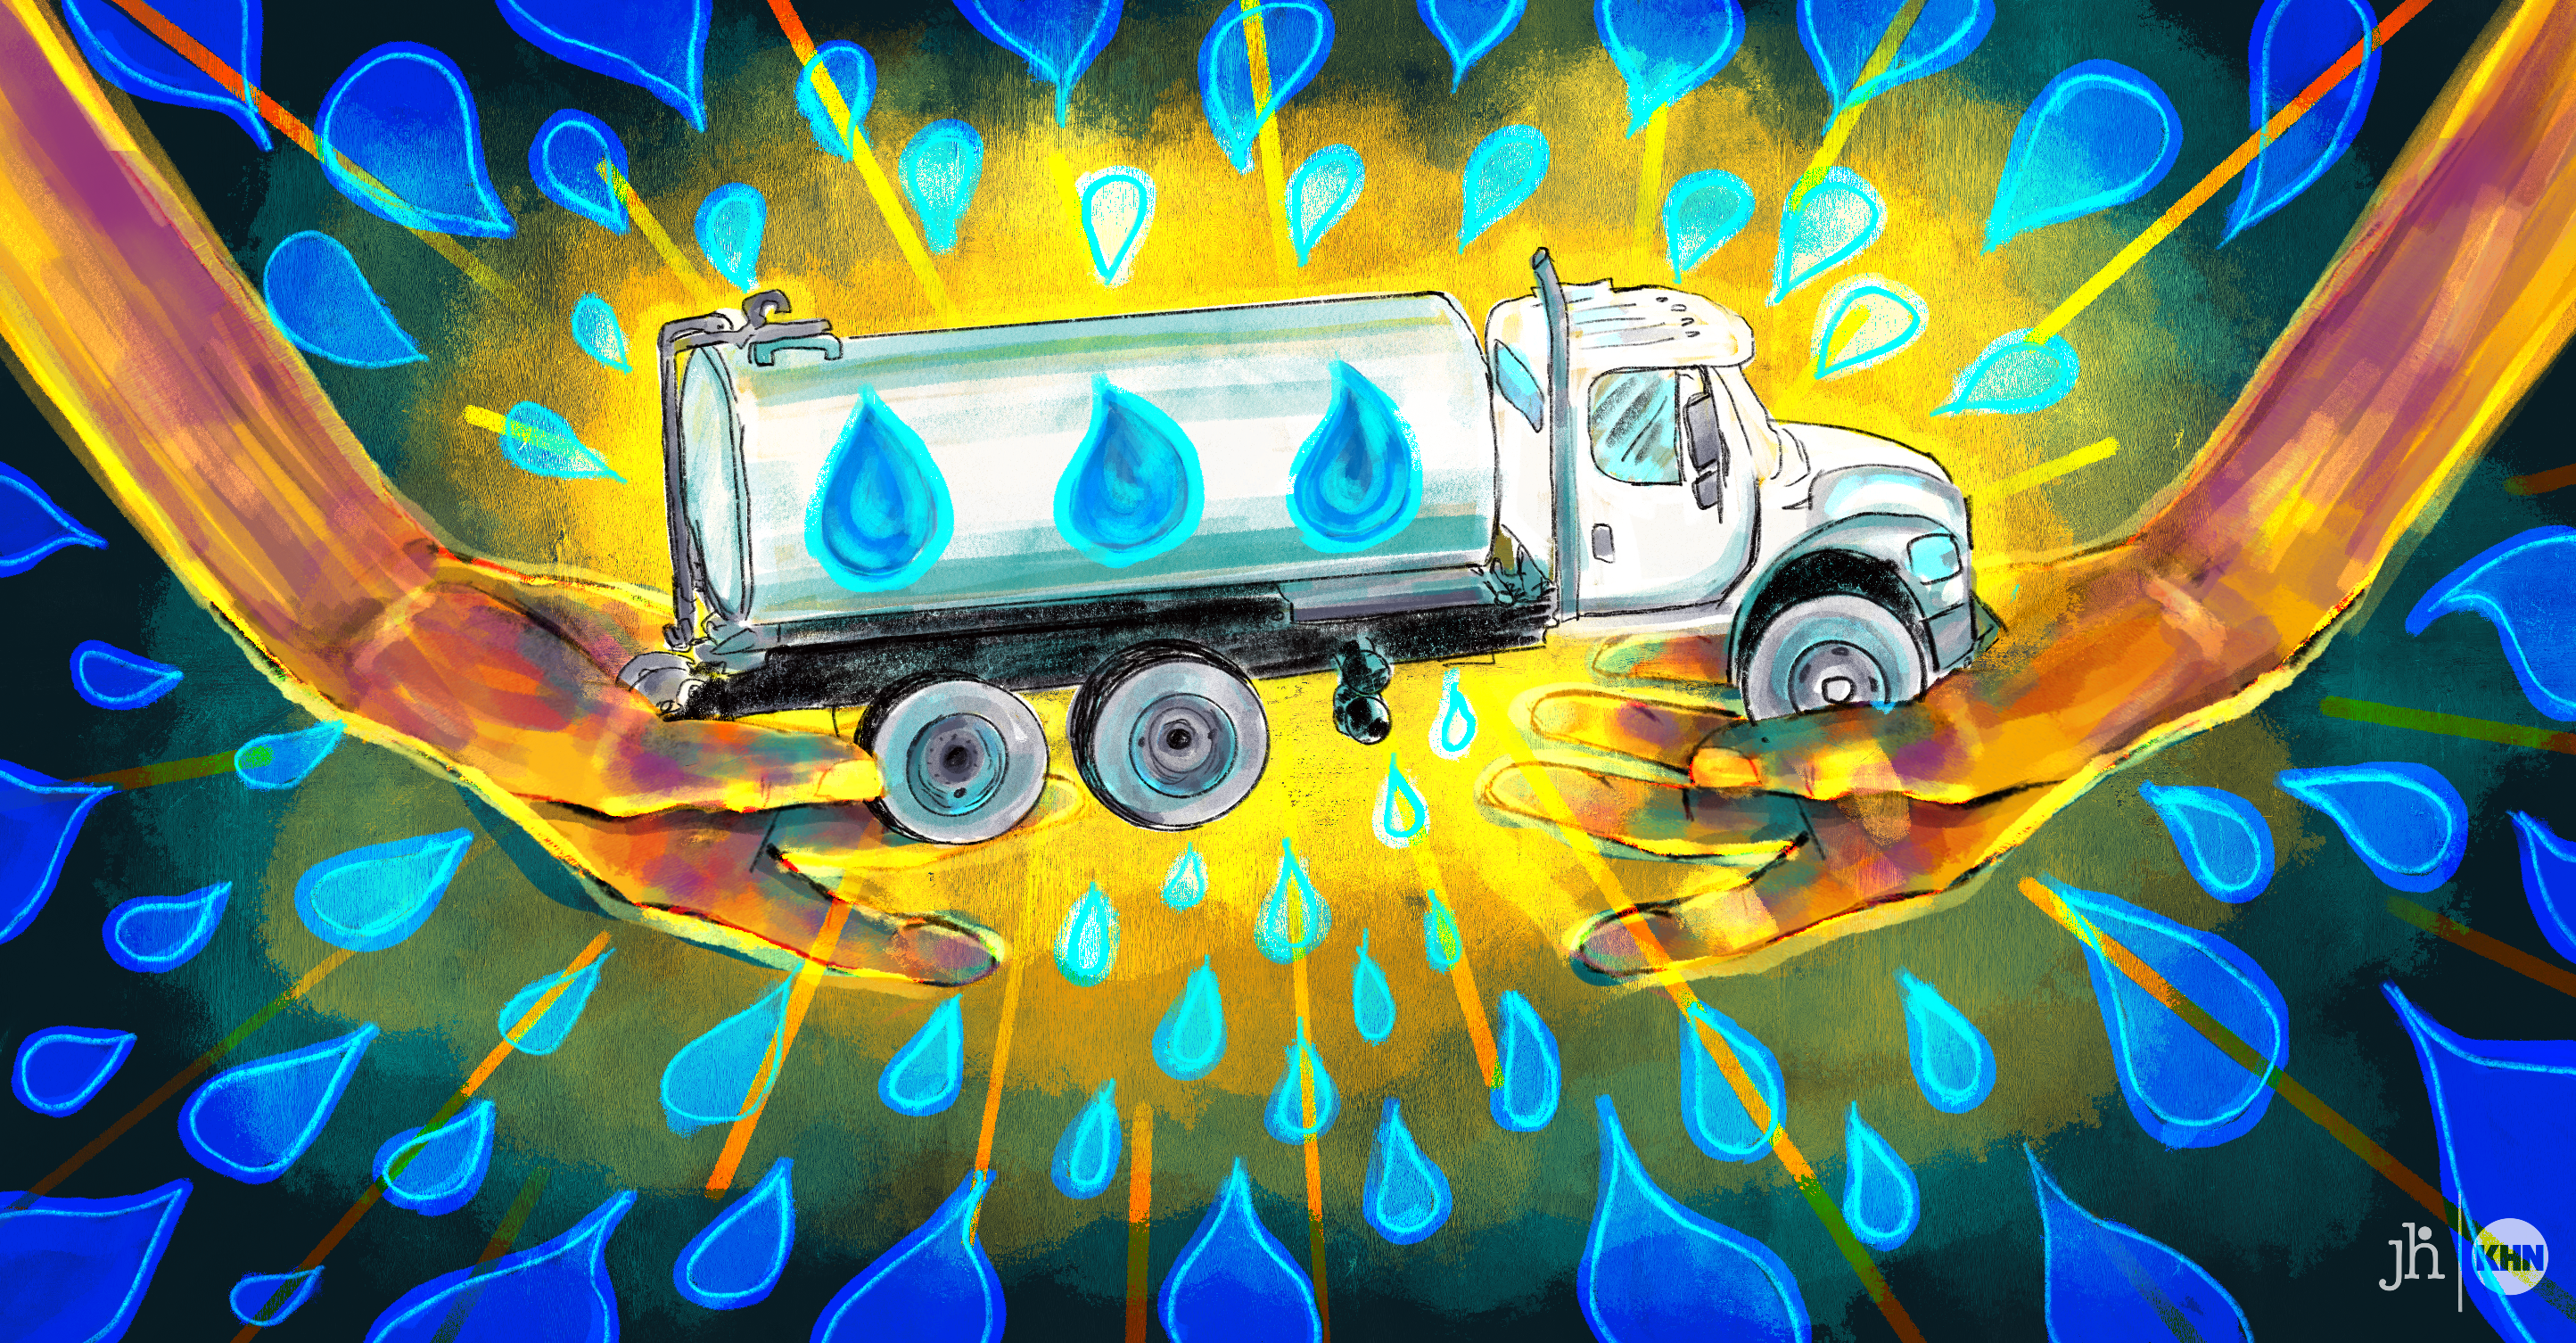 A digital illustration in watercolor and pencil. Two hands are seen holding a right-facing water tank truck. Bright blue water drops radiate outward from it. A golden yellow fades to black in the background, symbolic of the hope the water truck brings.